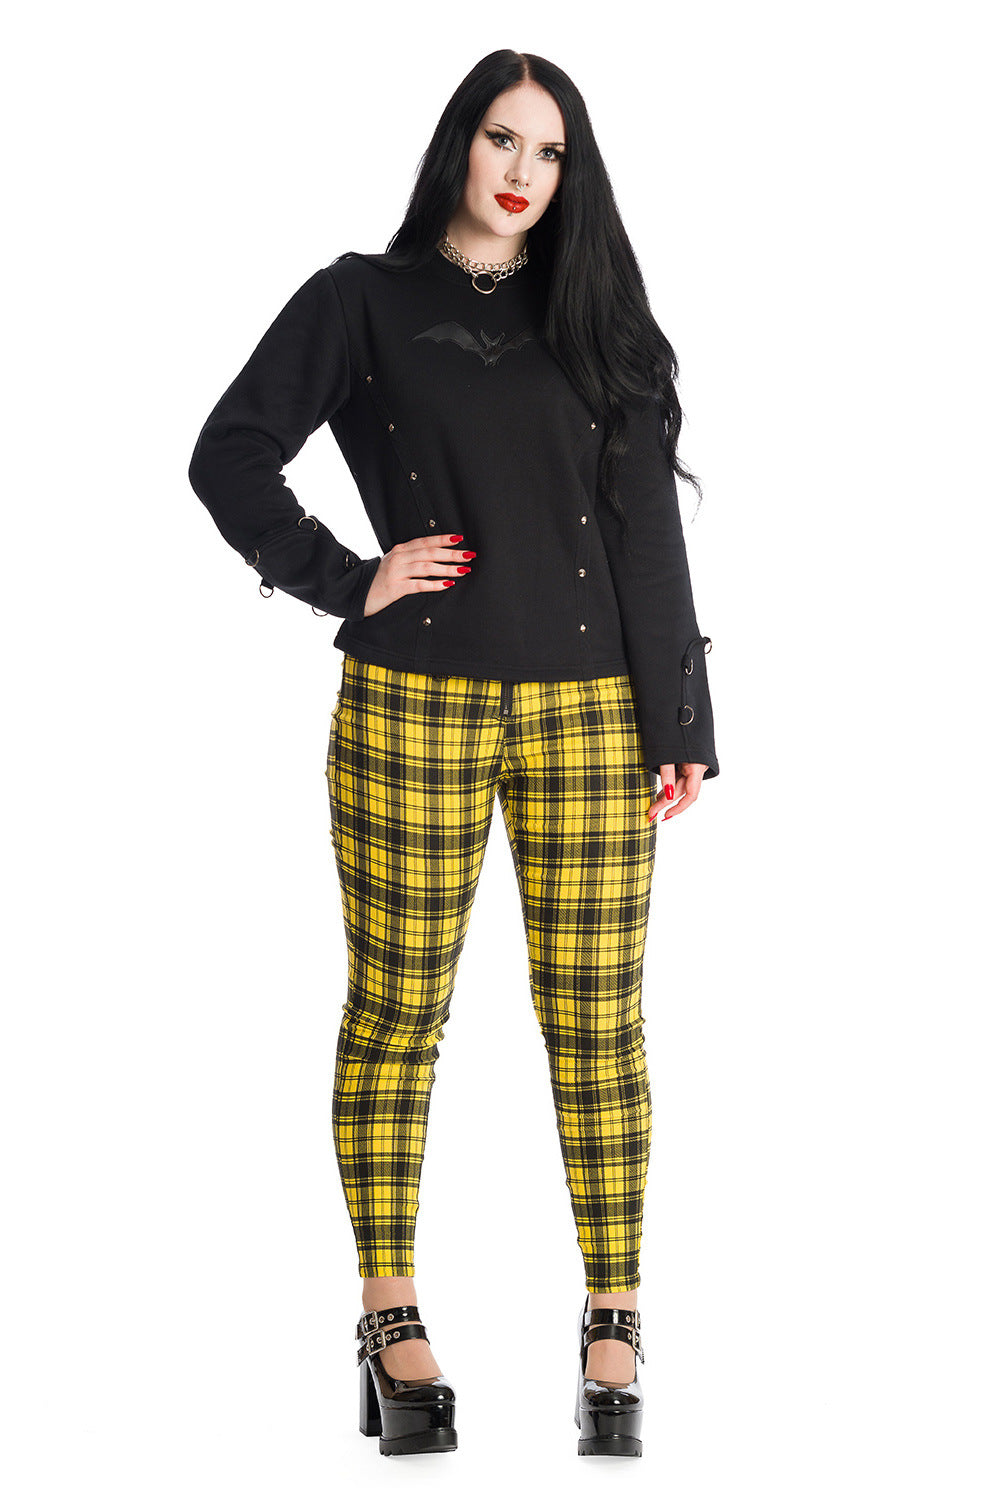 Gothic model in yellow tartan trousers with black bat long sleeve top 